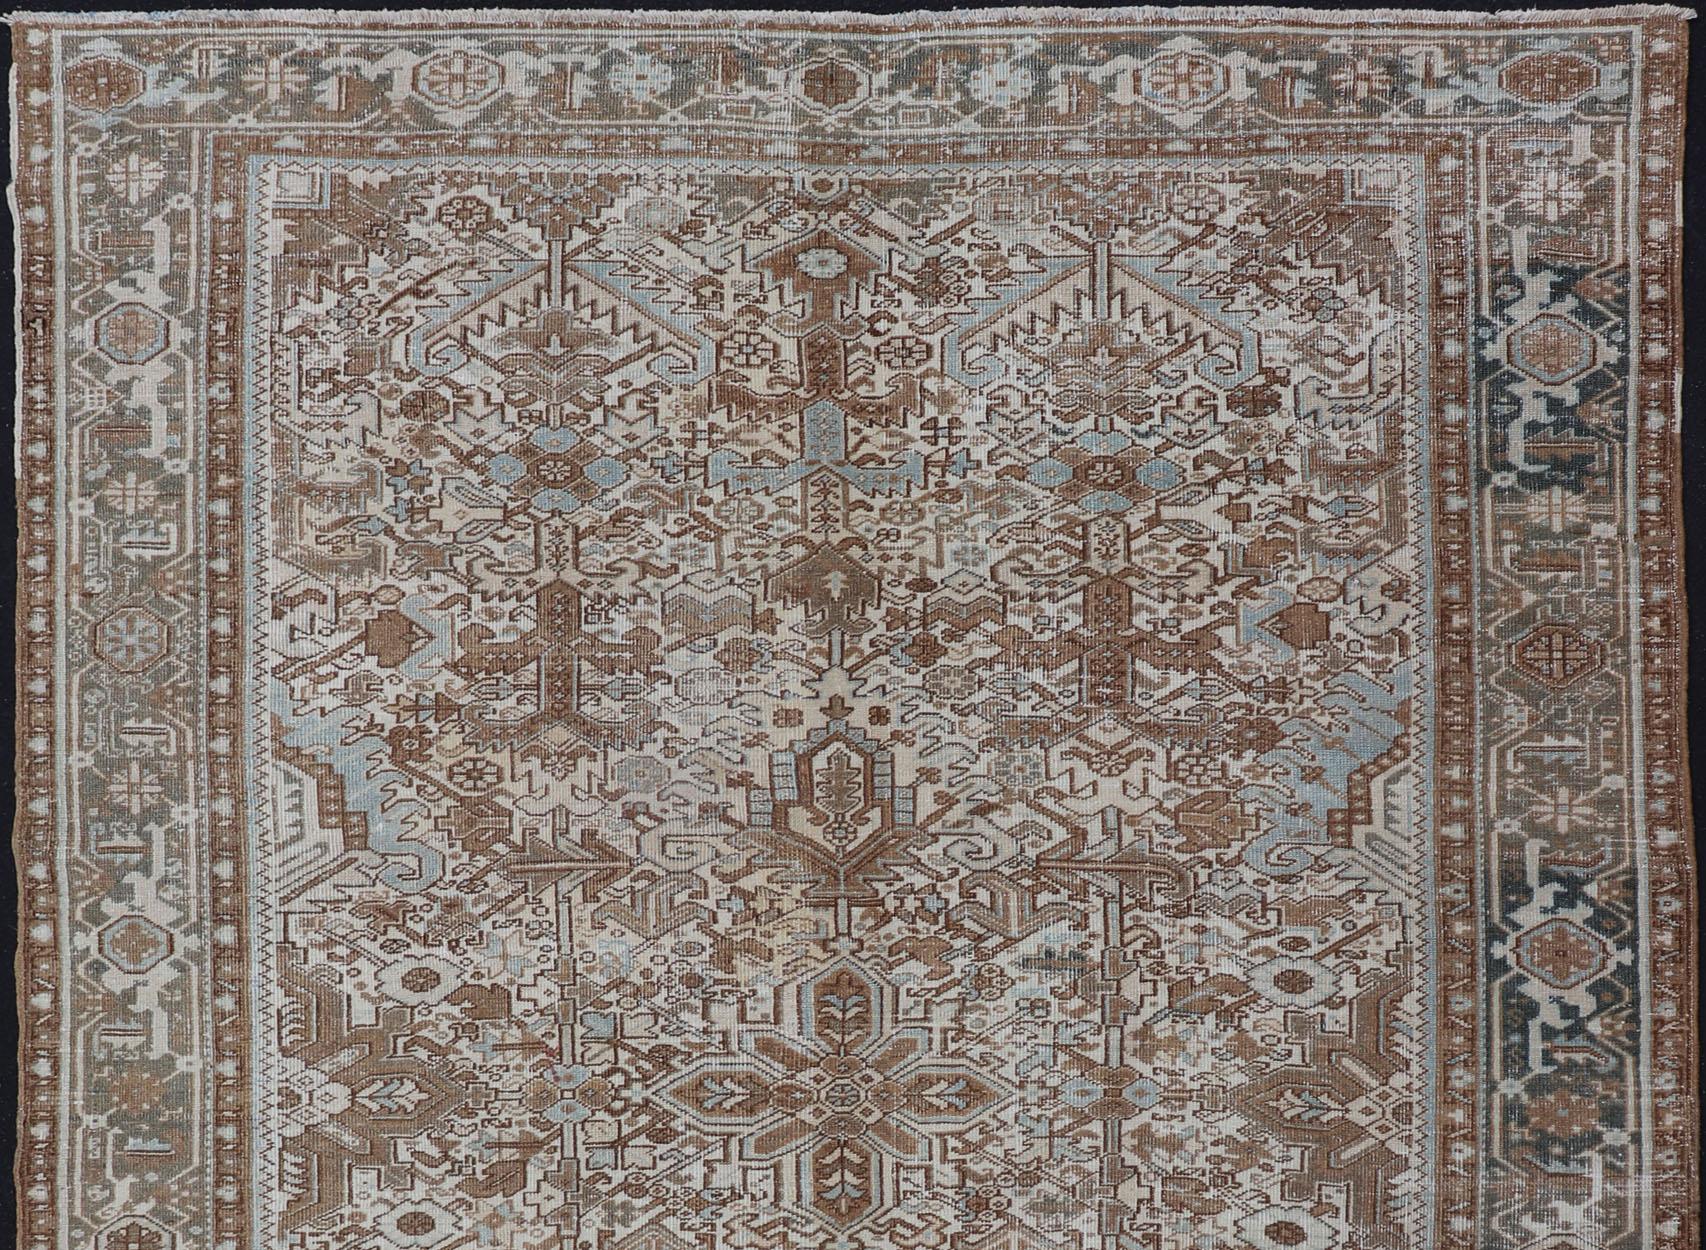 This vintage hand-knotted Persian Heriz rug features an all-over sub-geometric design, enclosed within a complementary, multi-tiered border. The rug is rendered in blues and natural tones; making it a perfect fit for a variety of classic, casual and